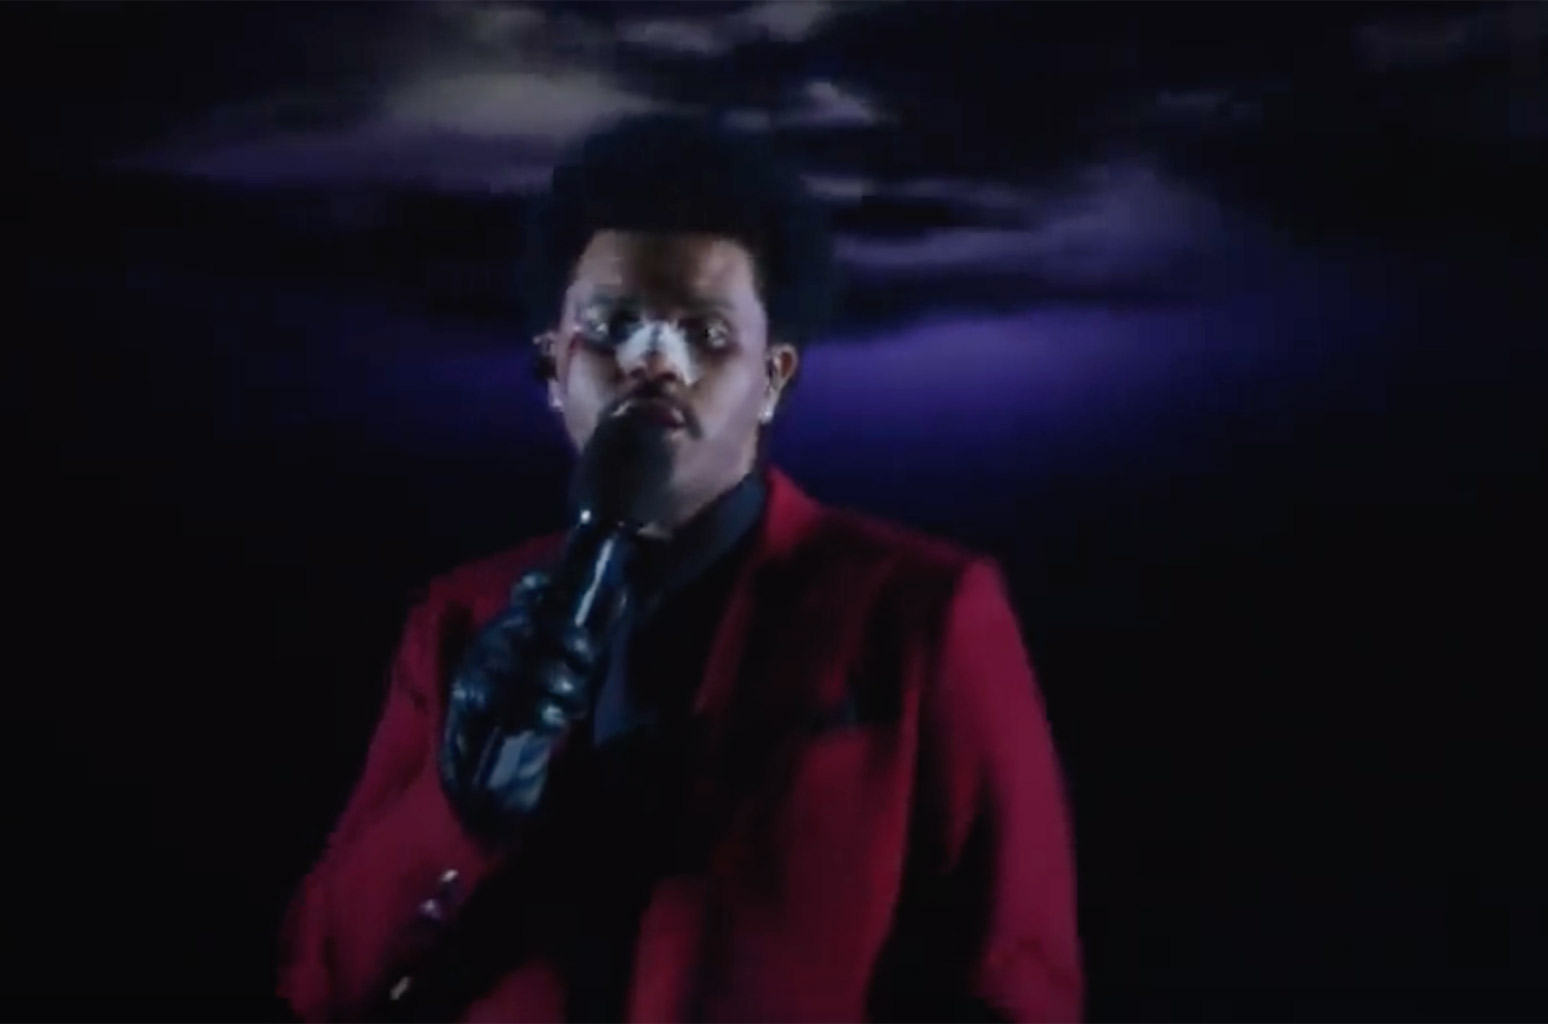 The Weeknd Brings the 'Blinding Lights' to 'Kimmel' For Invigorating Performance: Watch